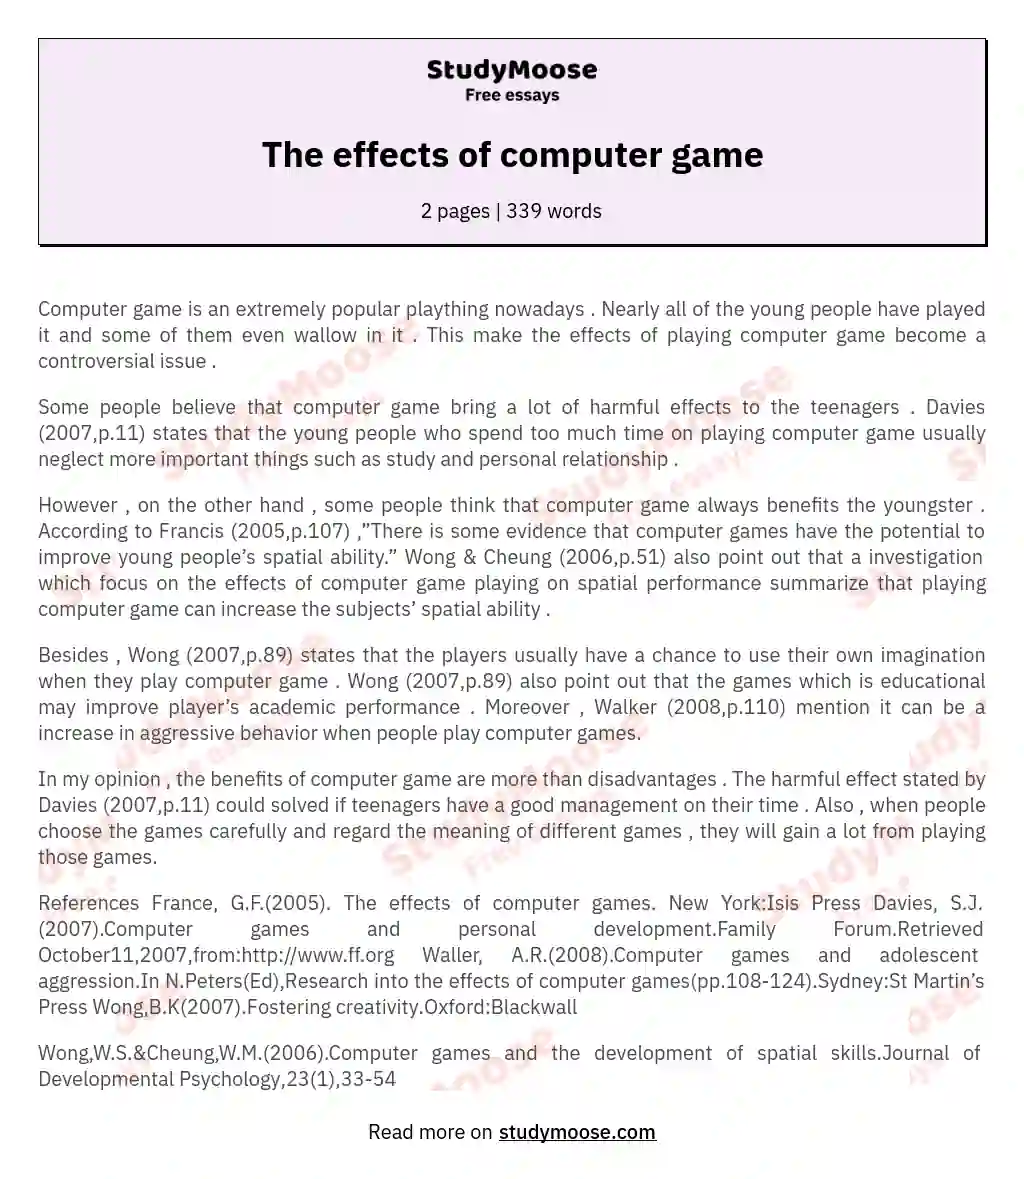 computer games are harmful essay